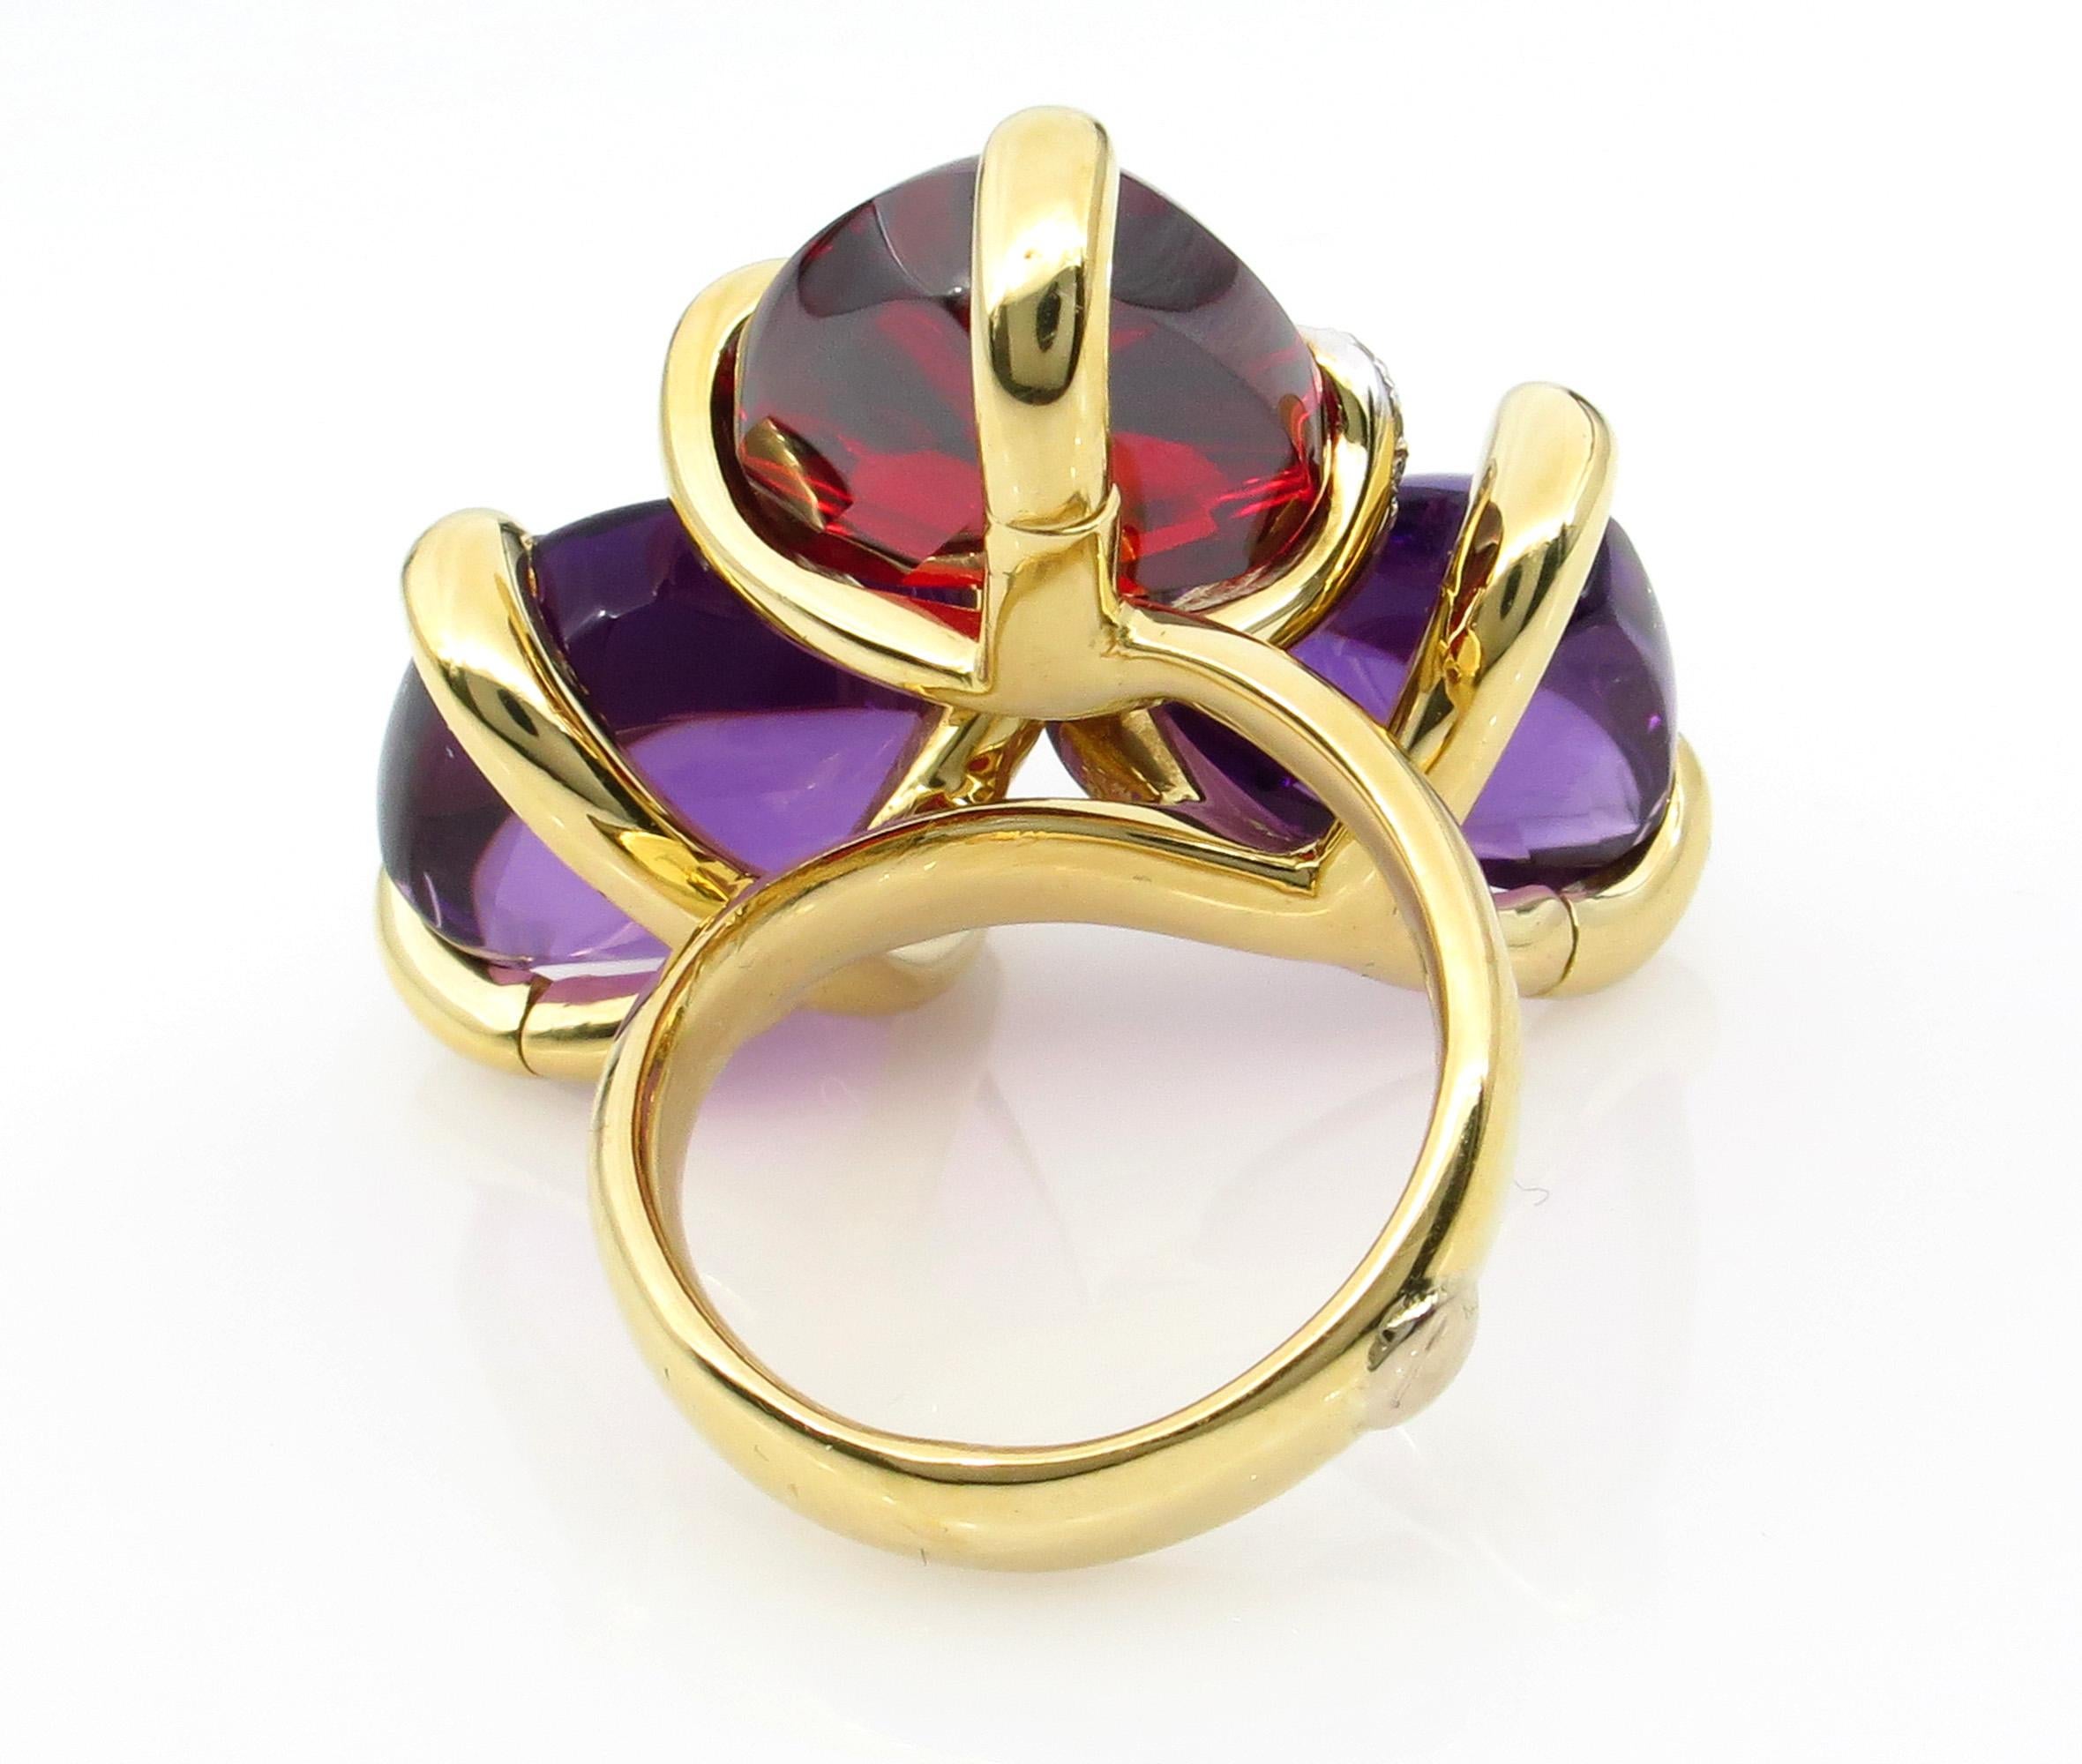 Bold and Fashionable Garnet, Amethyst and Diamonds in bright 18k Yellow Gold. 
A real Statement jewel, a gear Right Hand or Anniversary Ring! From our Estate Collection. The ring is in 18K Yellow Gold. The Three gem stones is accented with small